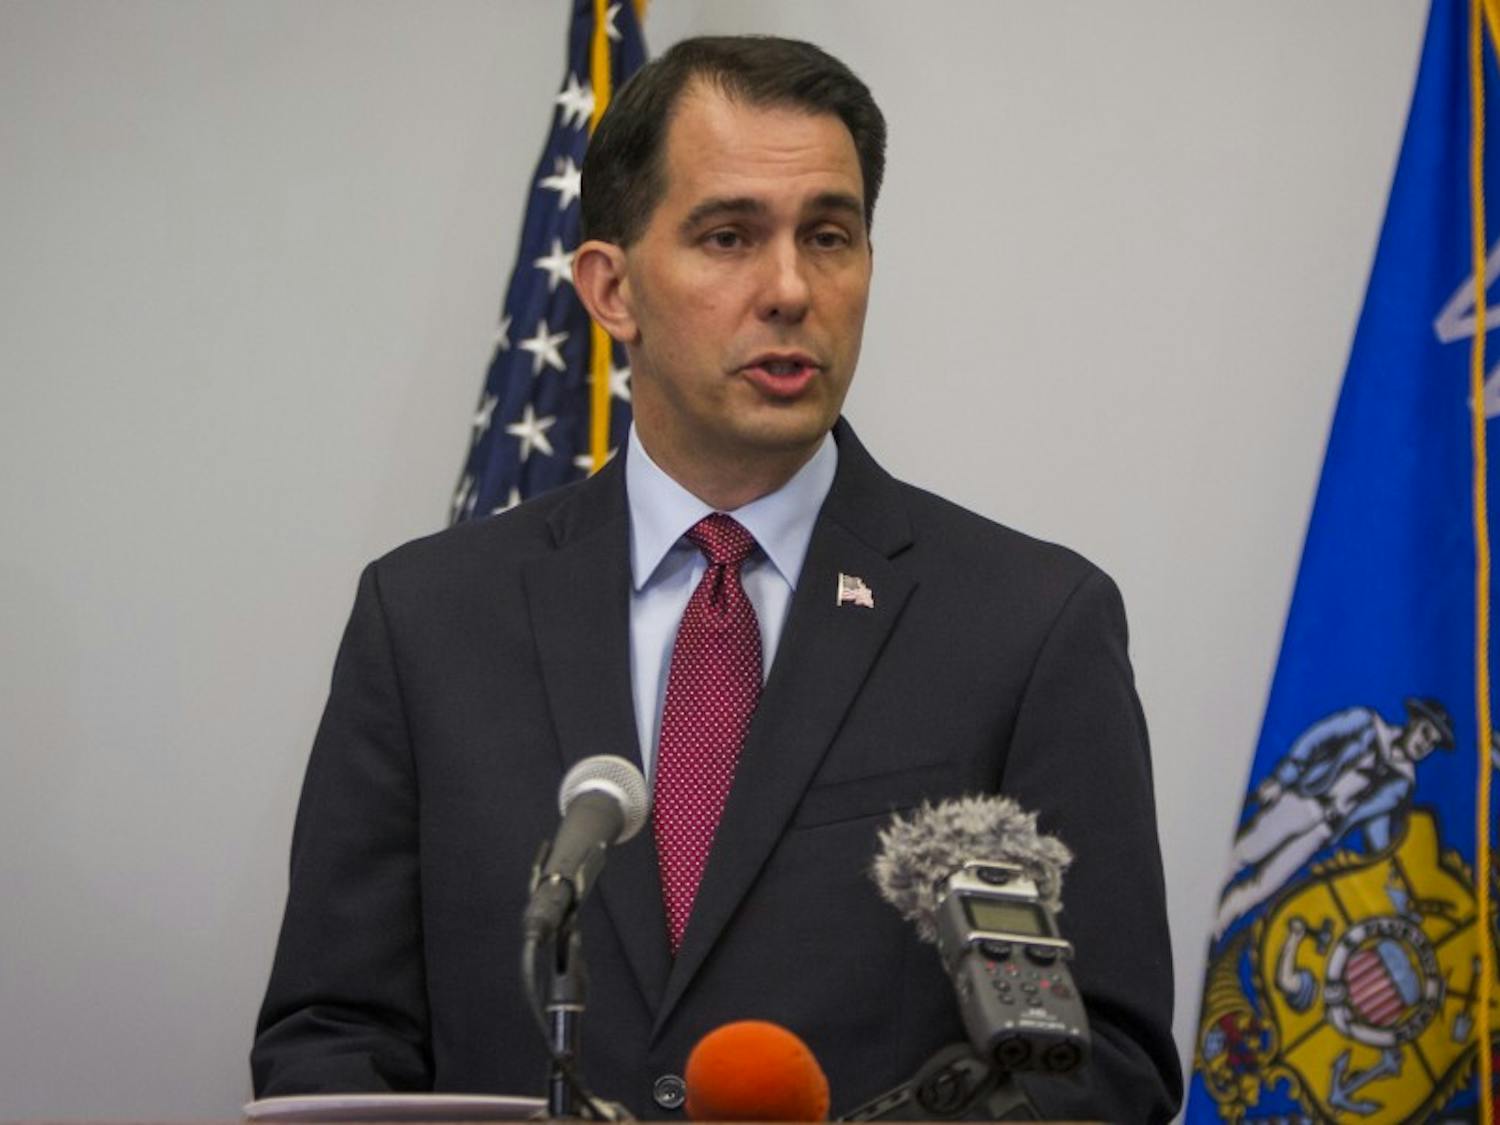 Gov. Scott Walker signed several more bills into law Tuesday, including two designed to expand the rights of property owners.